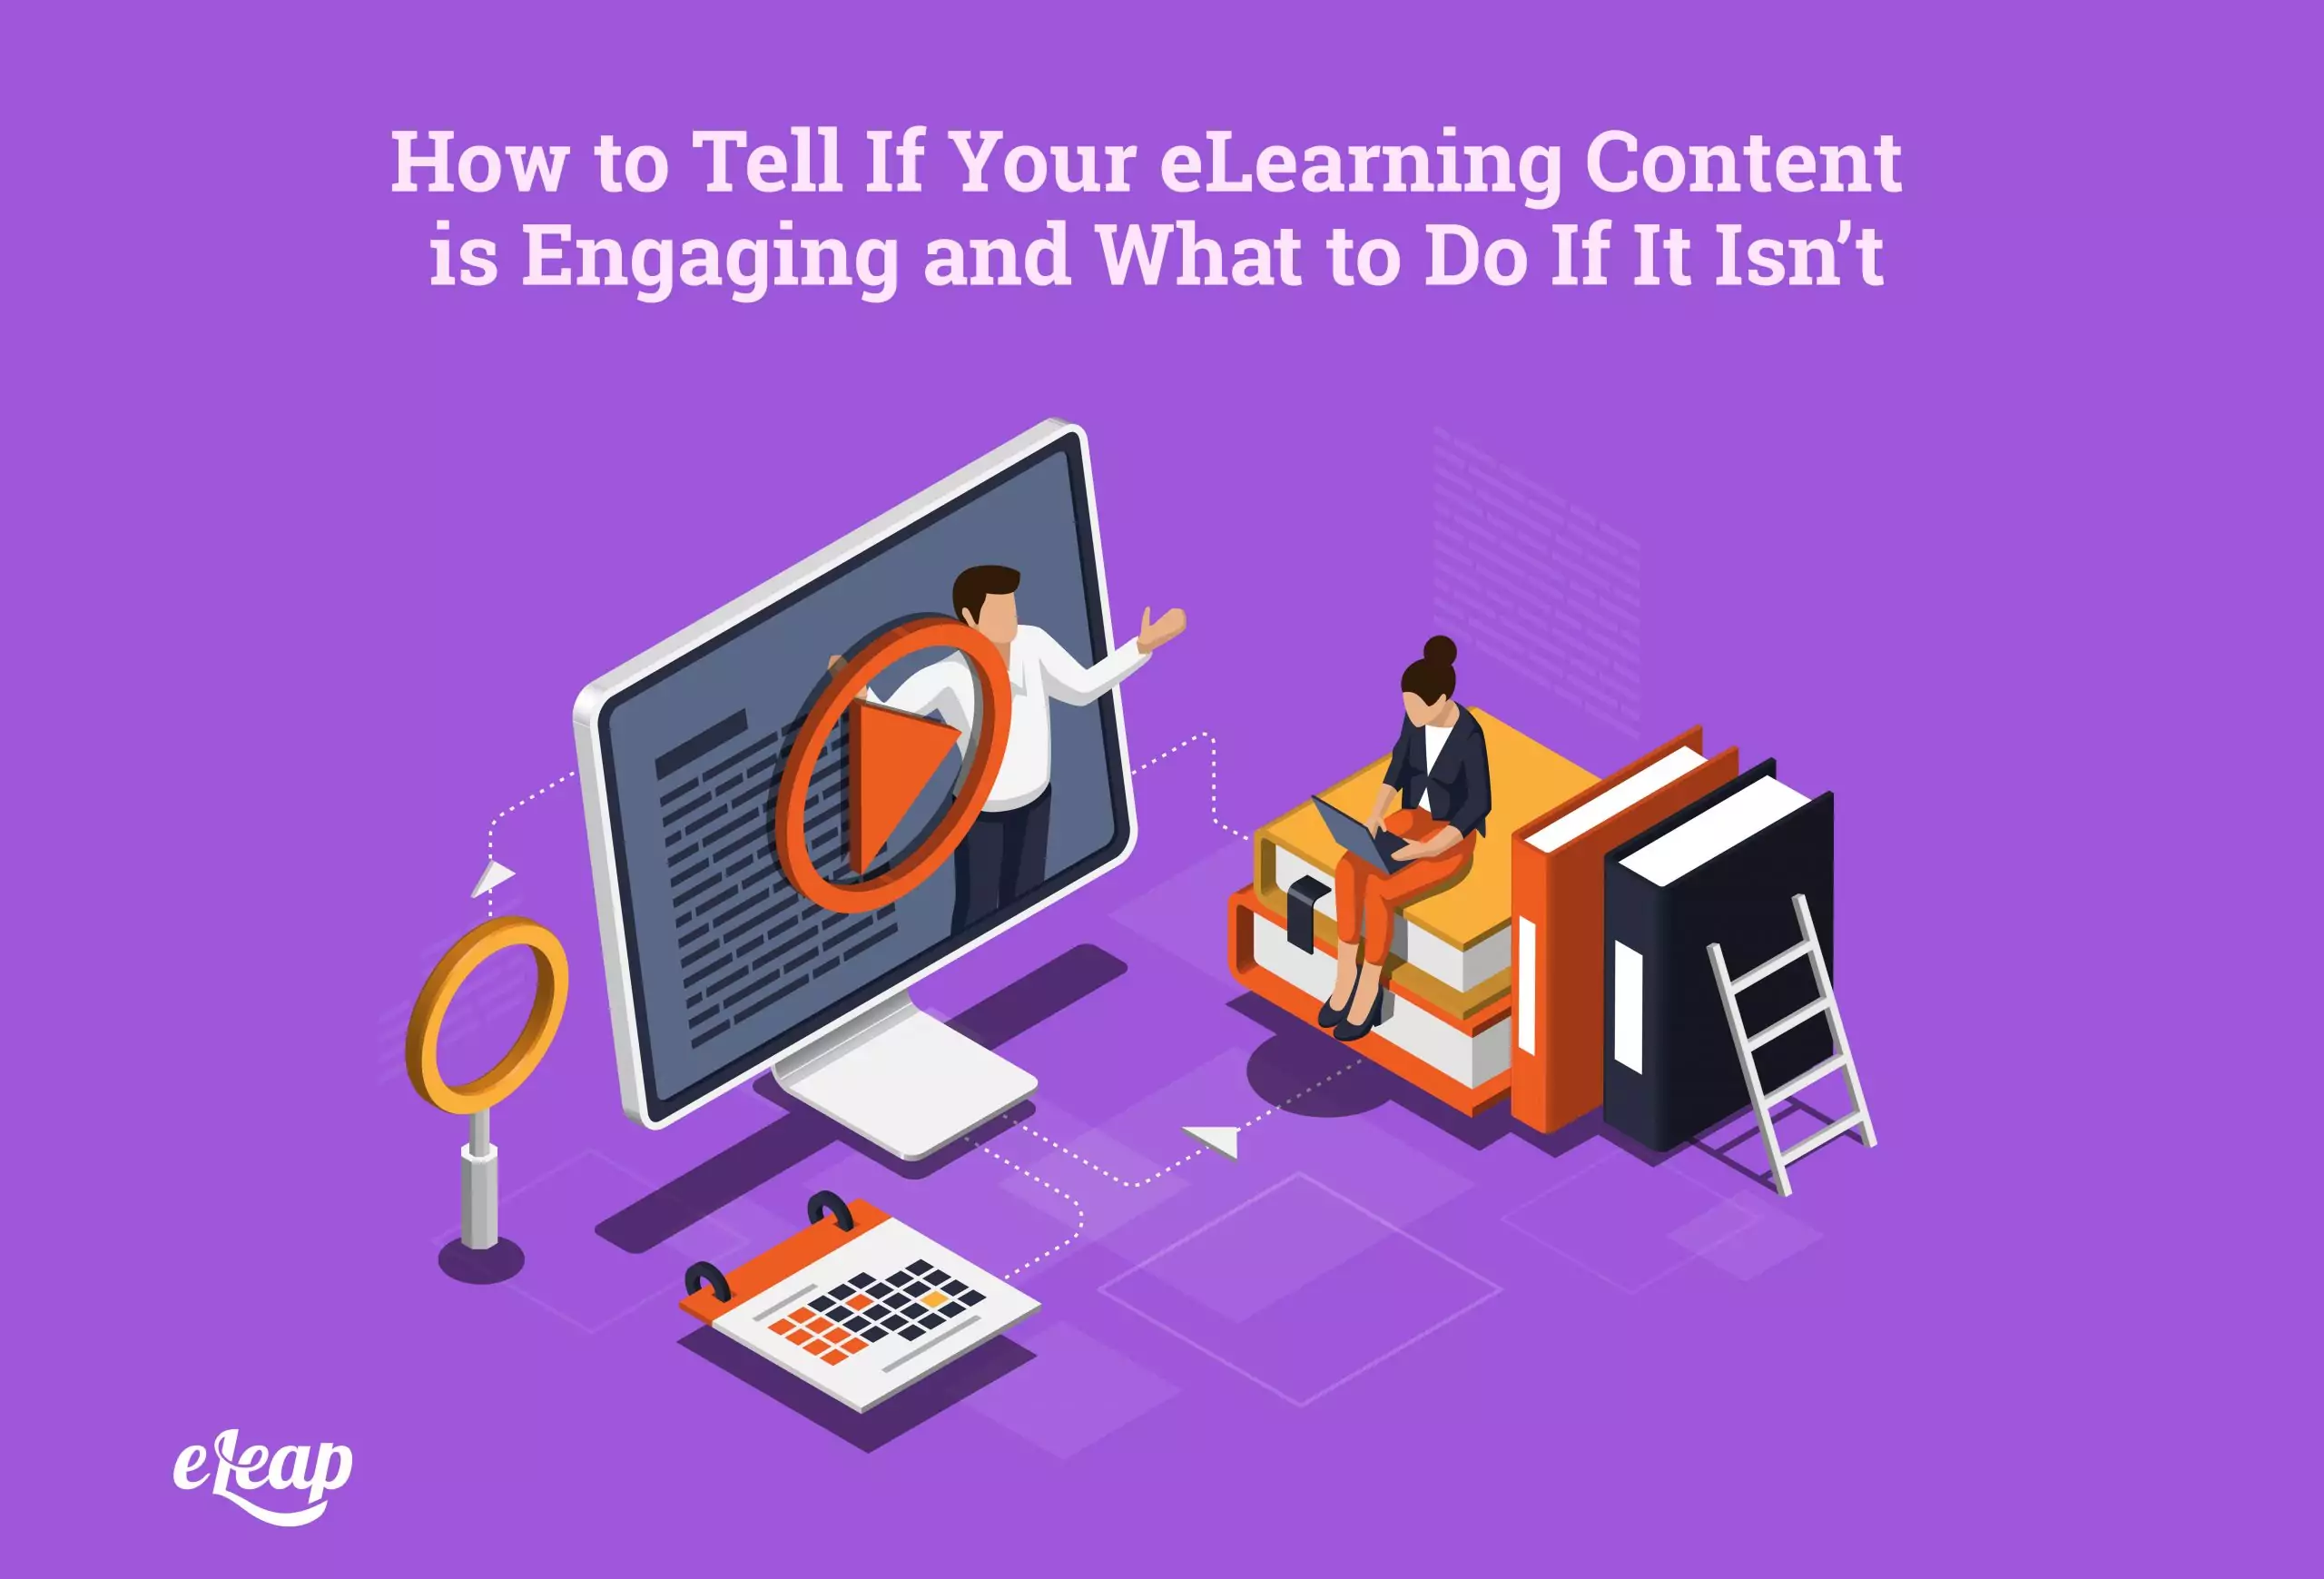 How to Tell If Your eLearning Content is Engaging